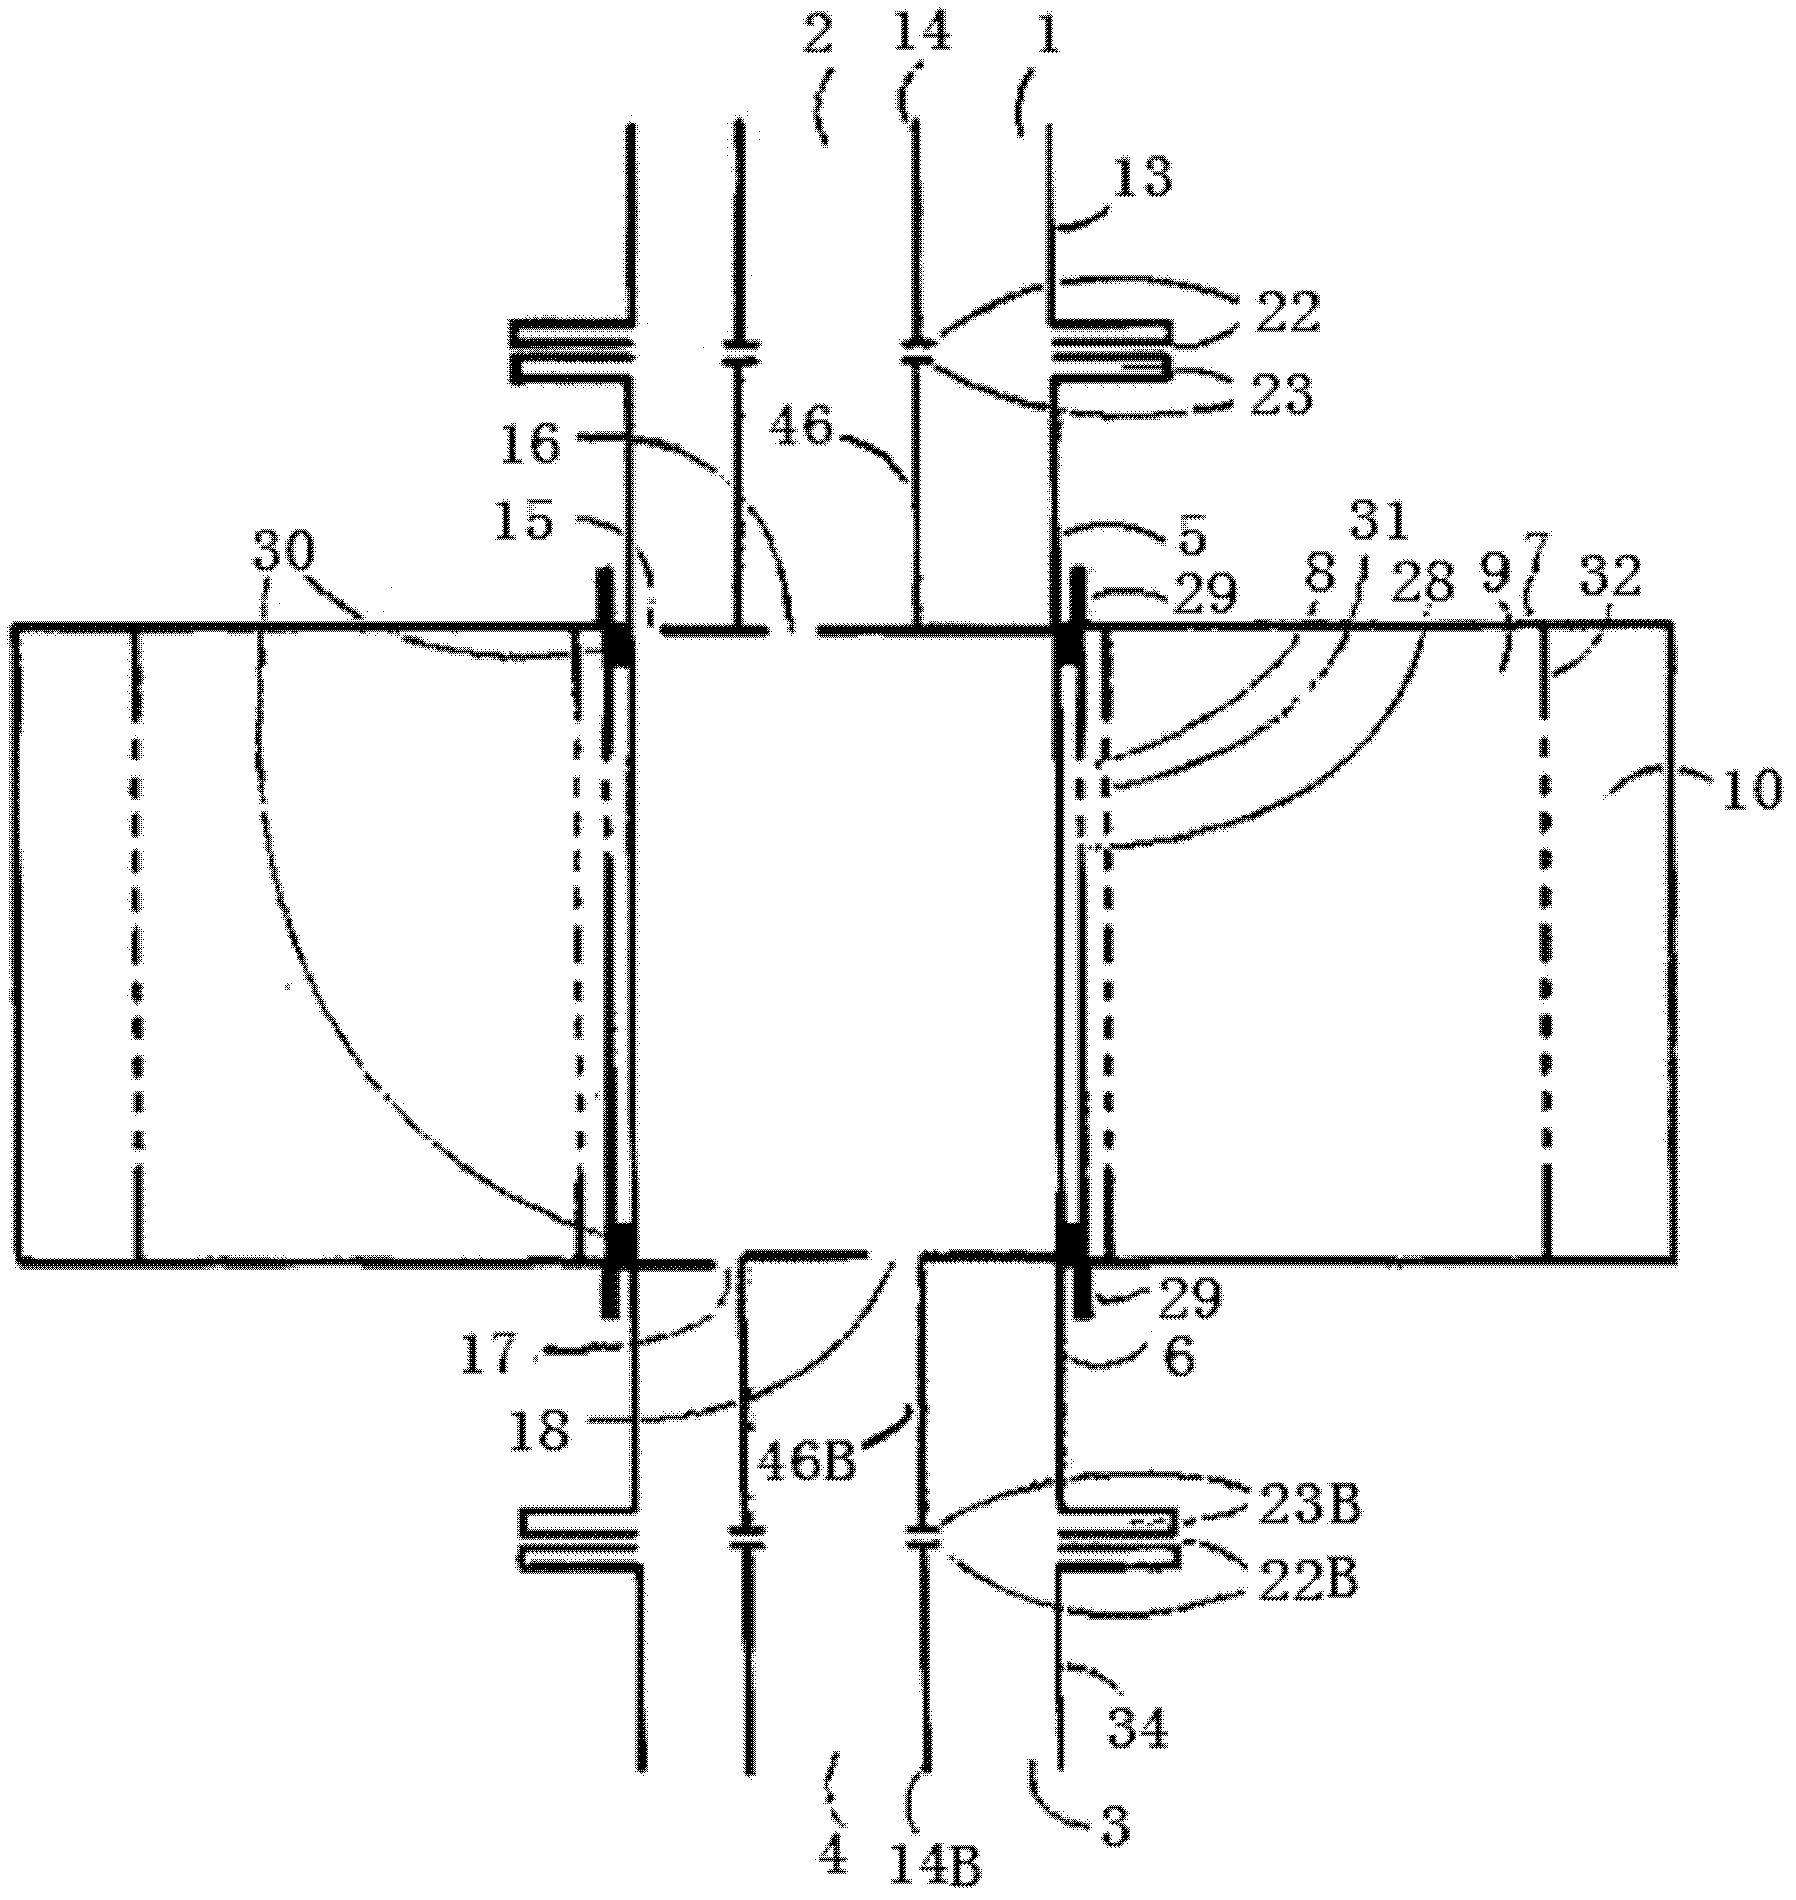 Simulated moving bed for chromatography device